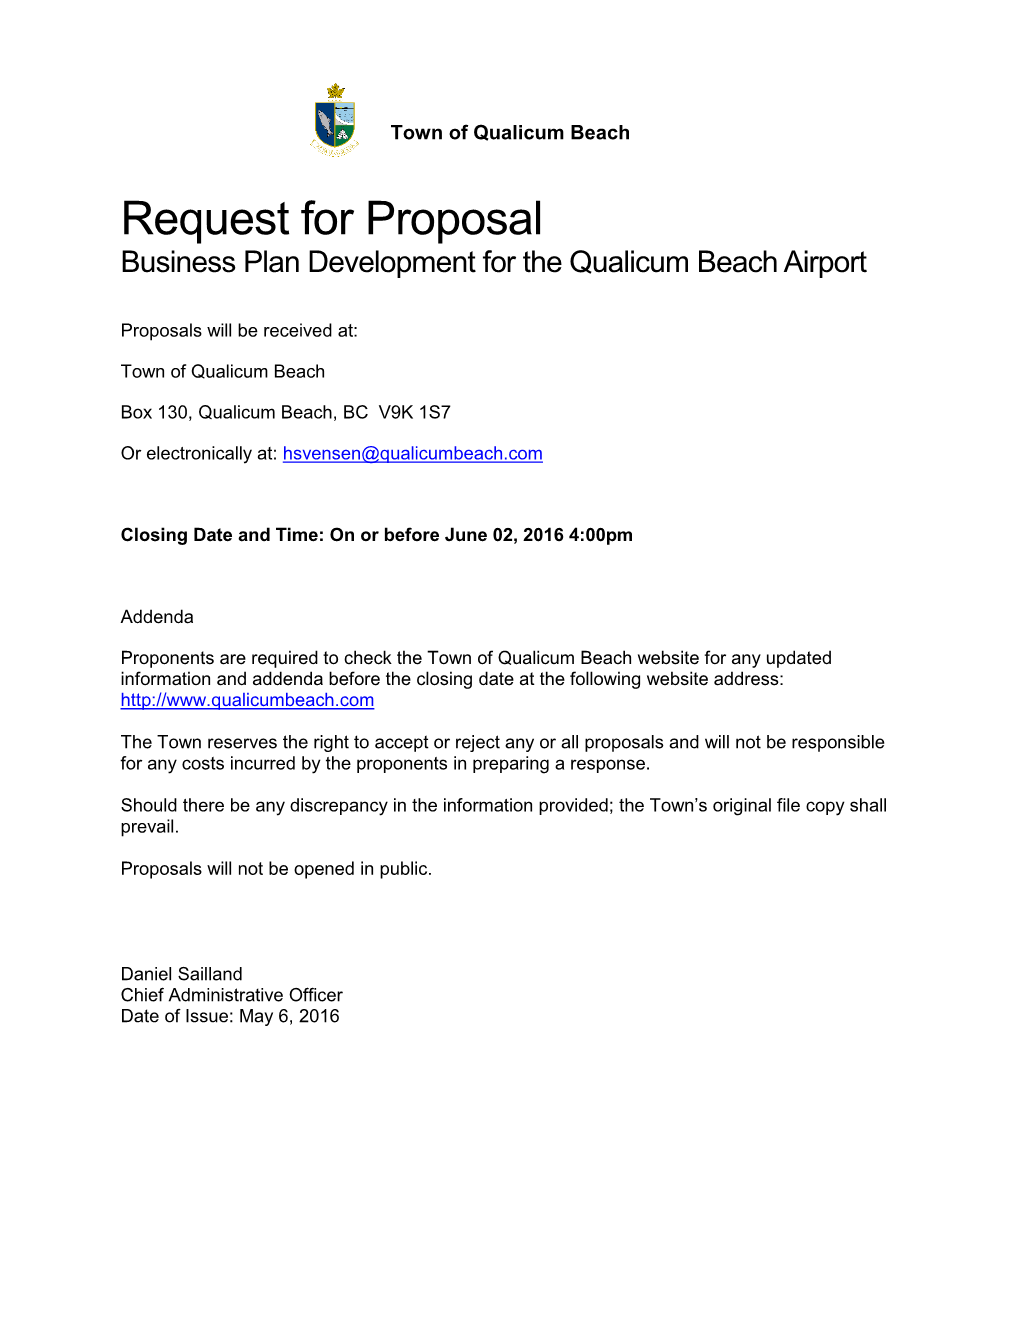 Request for Proposal Business Plan Development for the Qualicum Beach Airport